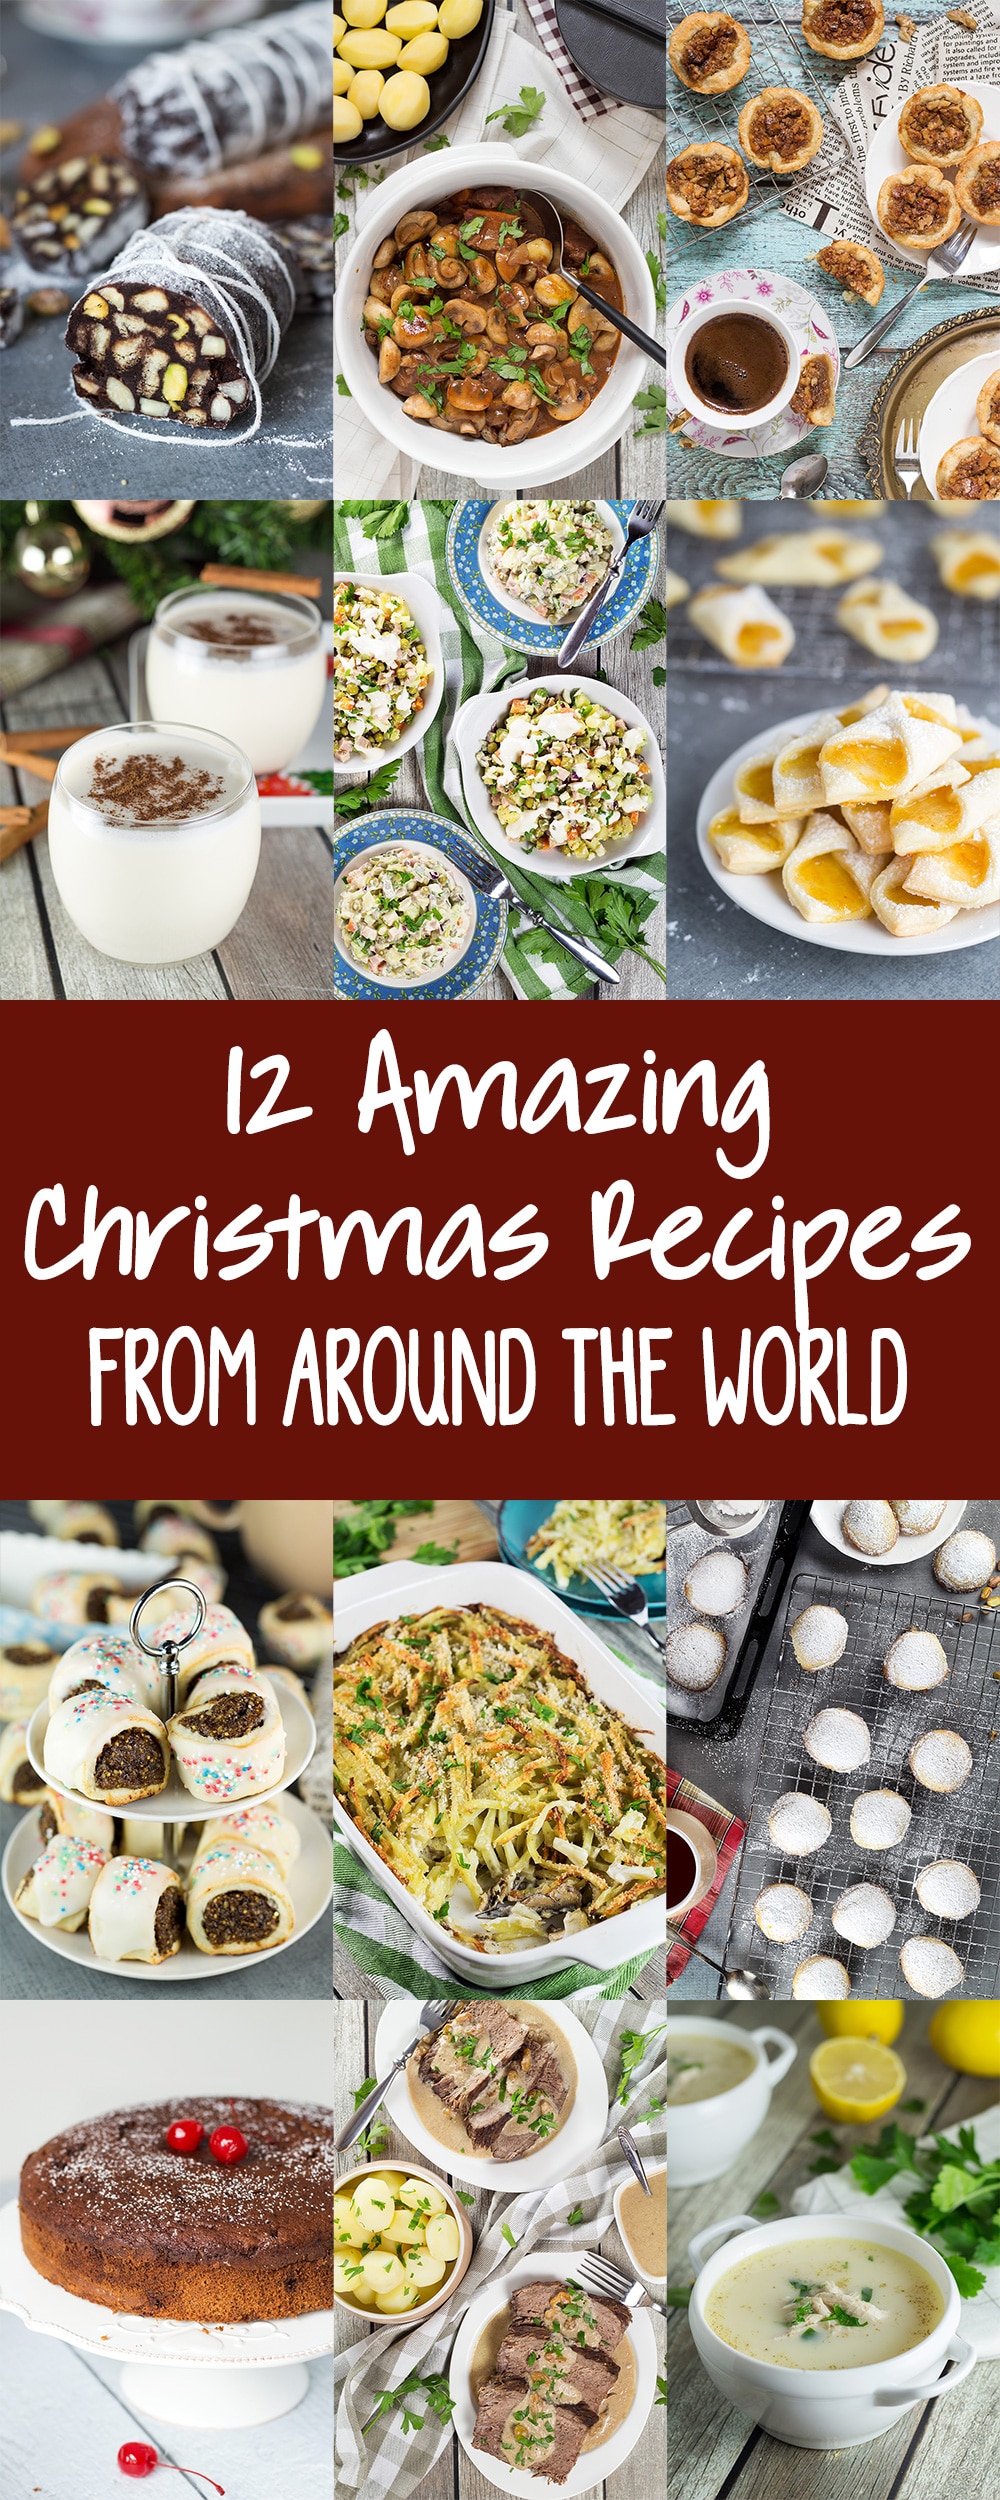 12 Amazing Christmas Recipes From Around The World for your holiday table. Everything from drinks and desserts to main dishes! #Christmas | cookingtheglobe.com